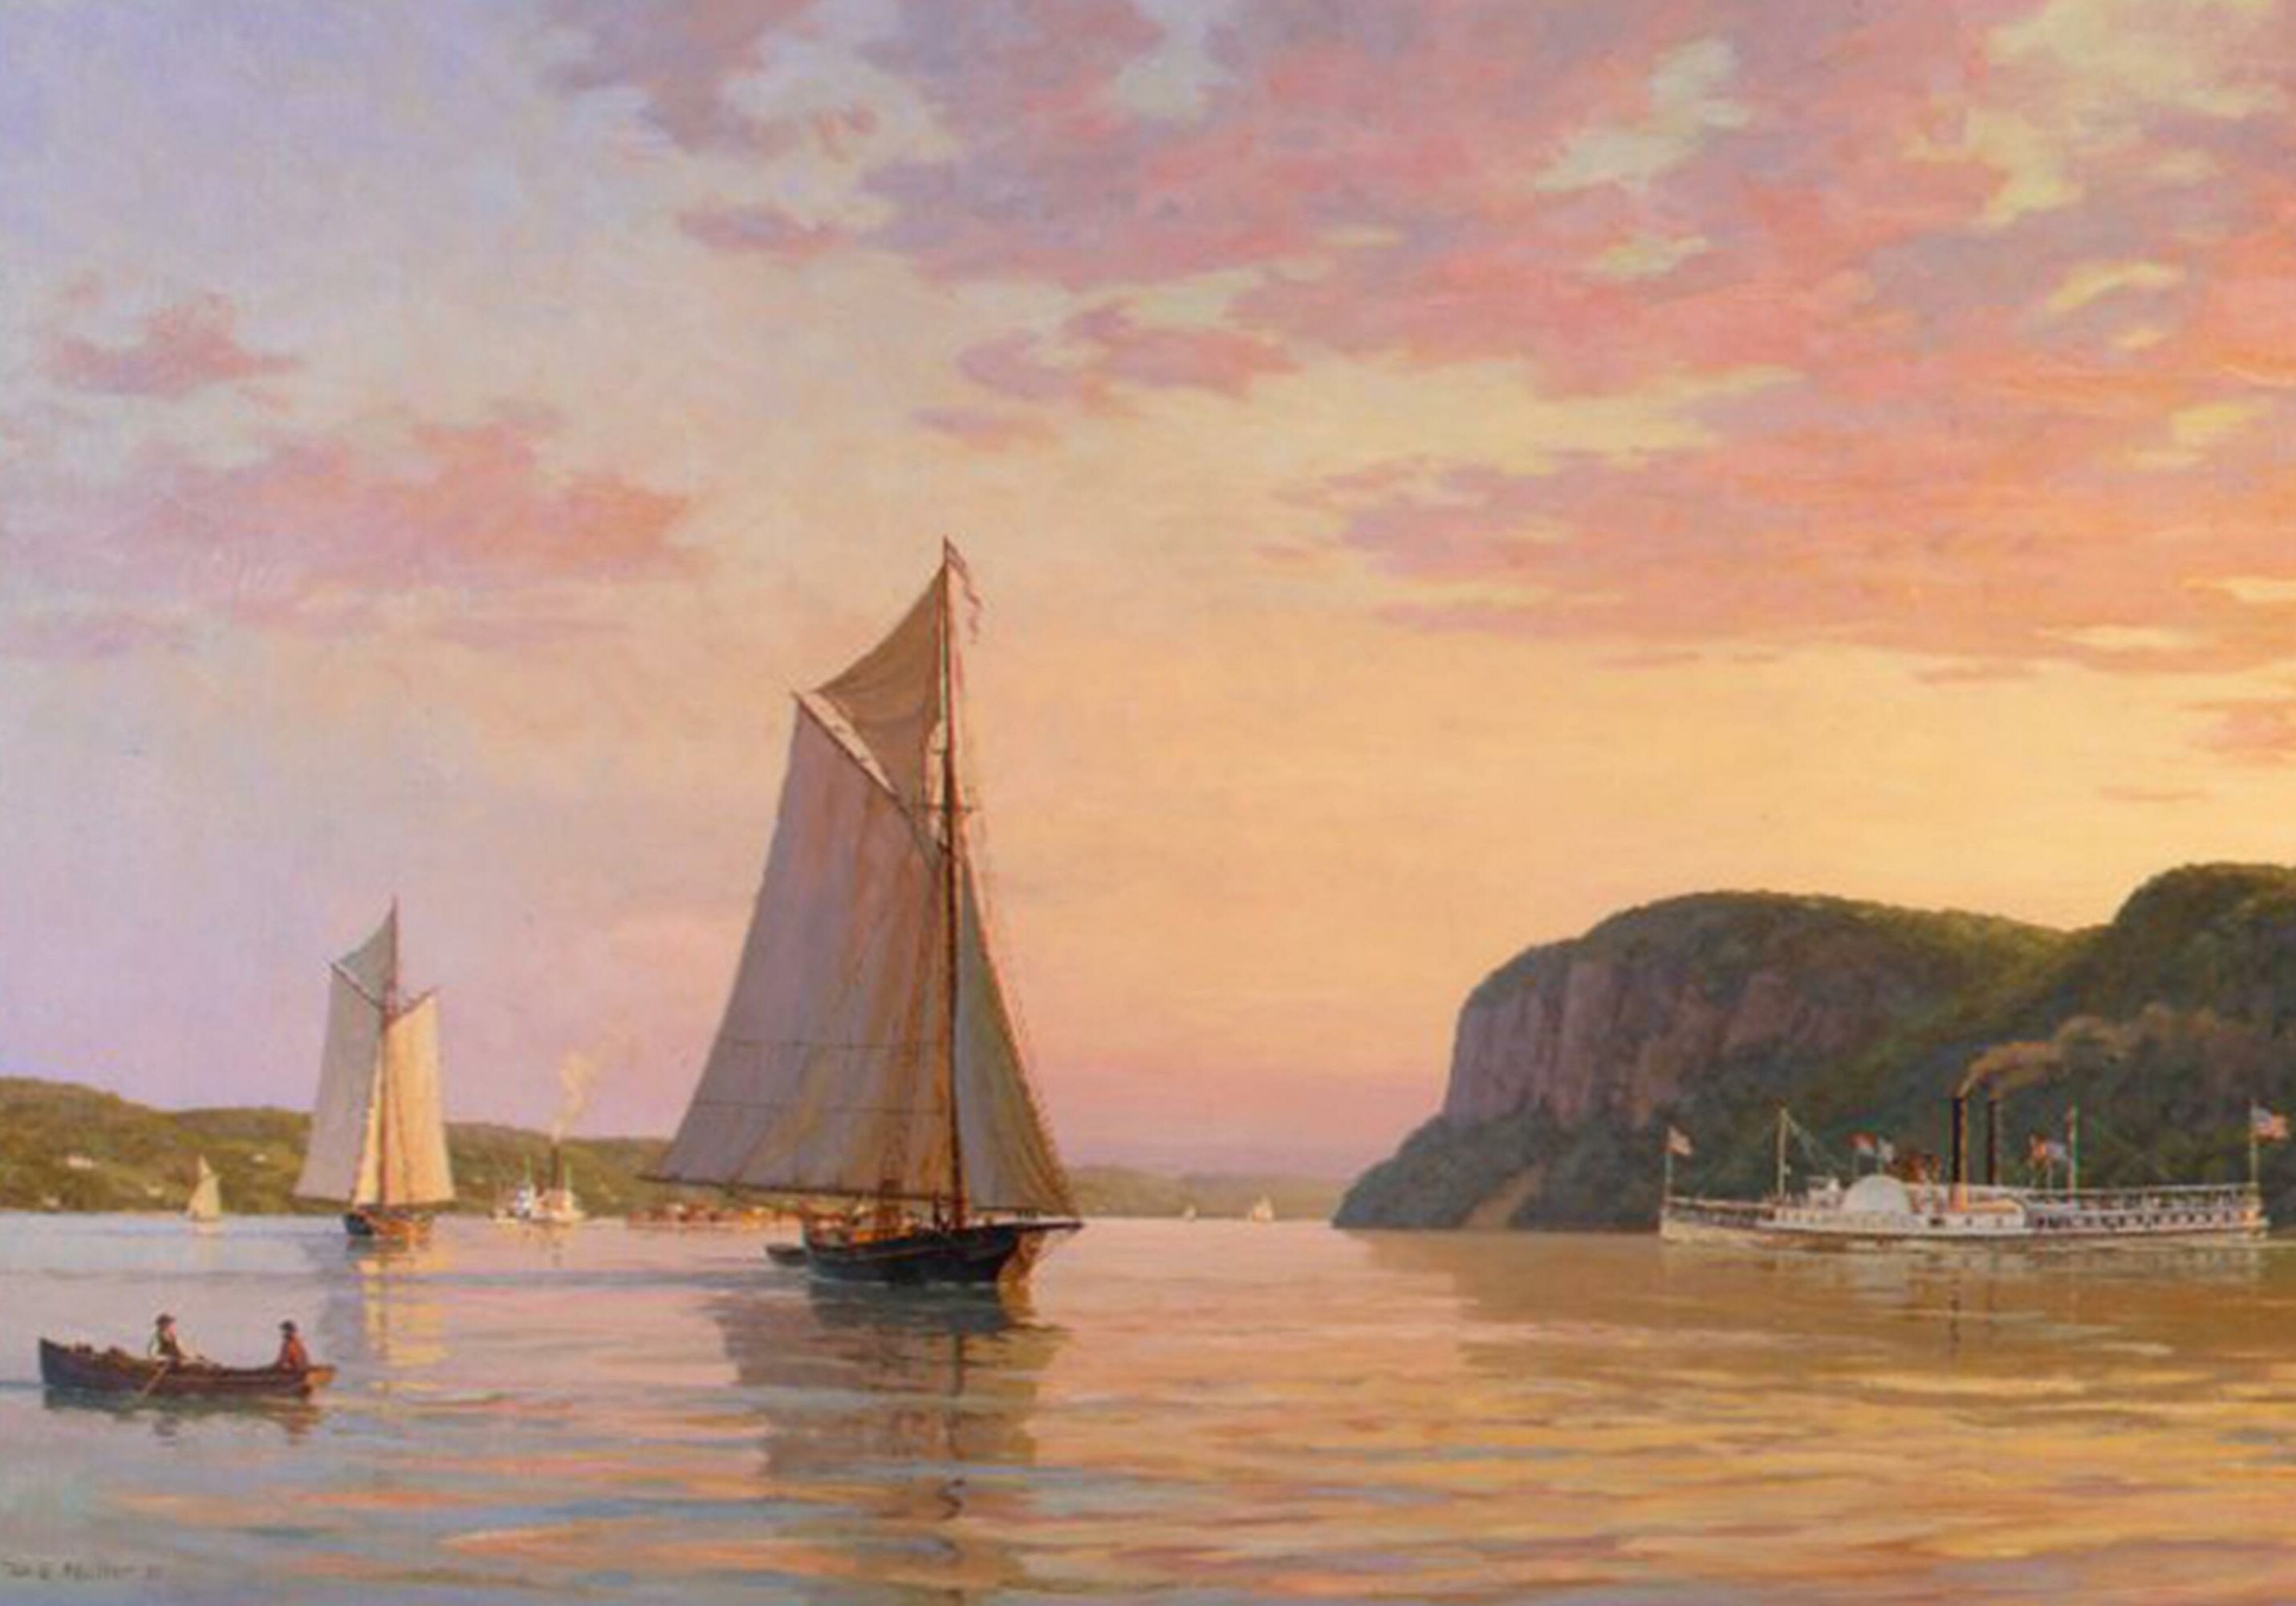 Evening On The Hudson,1862 By William G. Muller Post